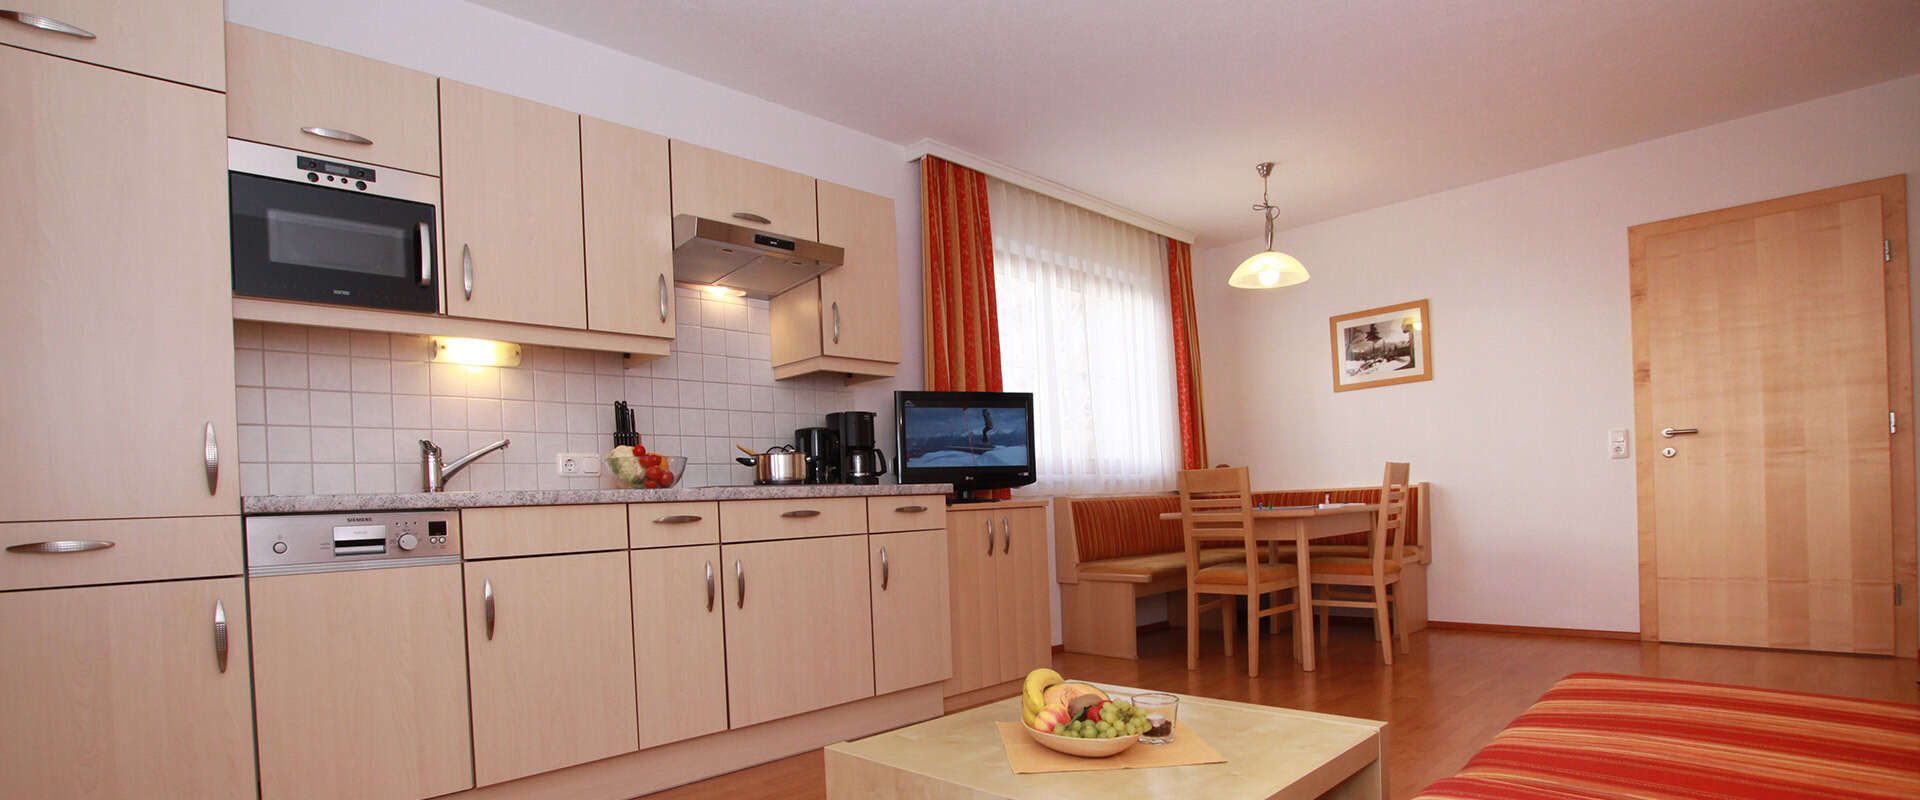 Apart Bergkristall with holiday flat including kitchen in Serfaus